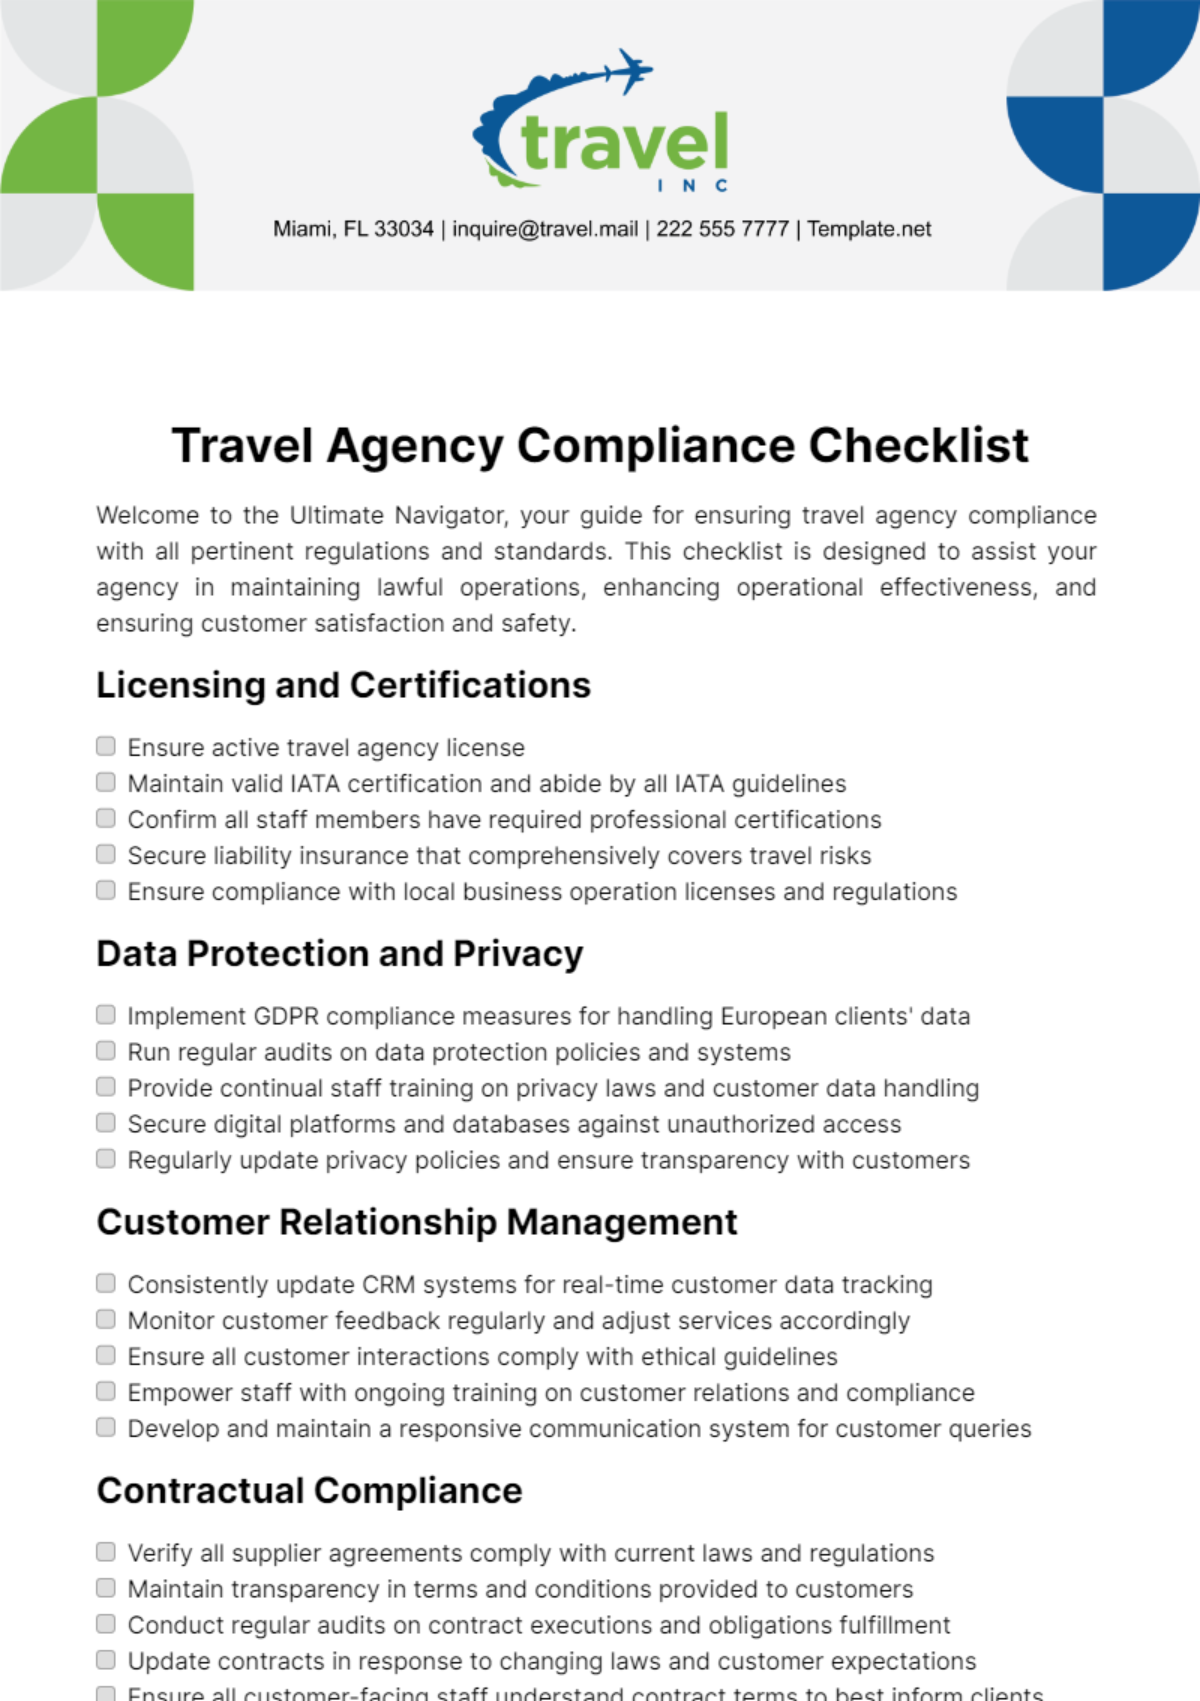 Travel Agency Compliance Checklist Template